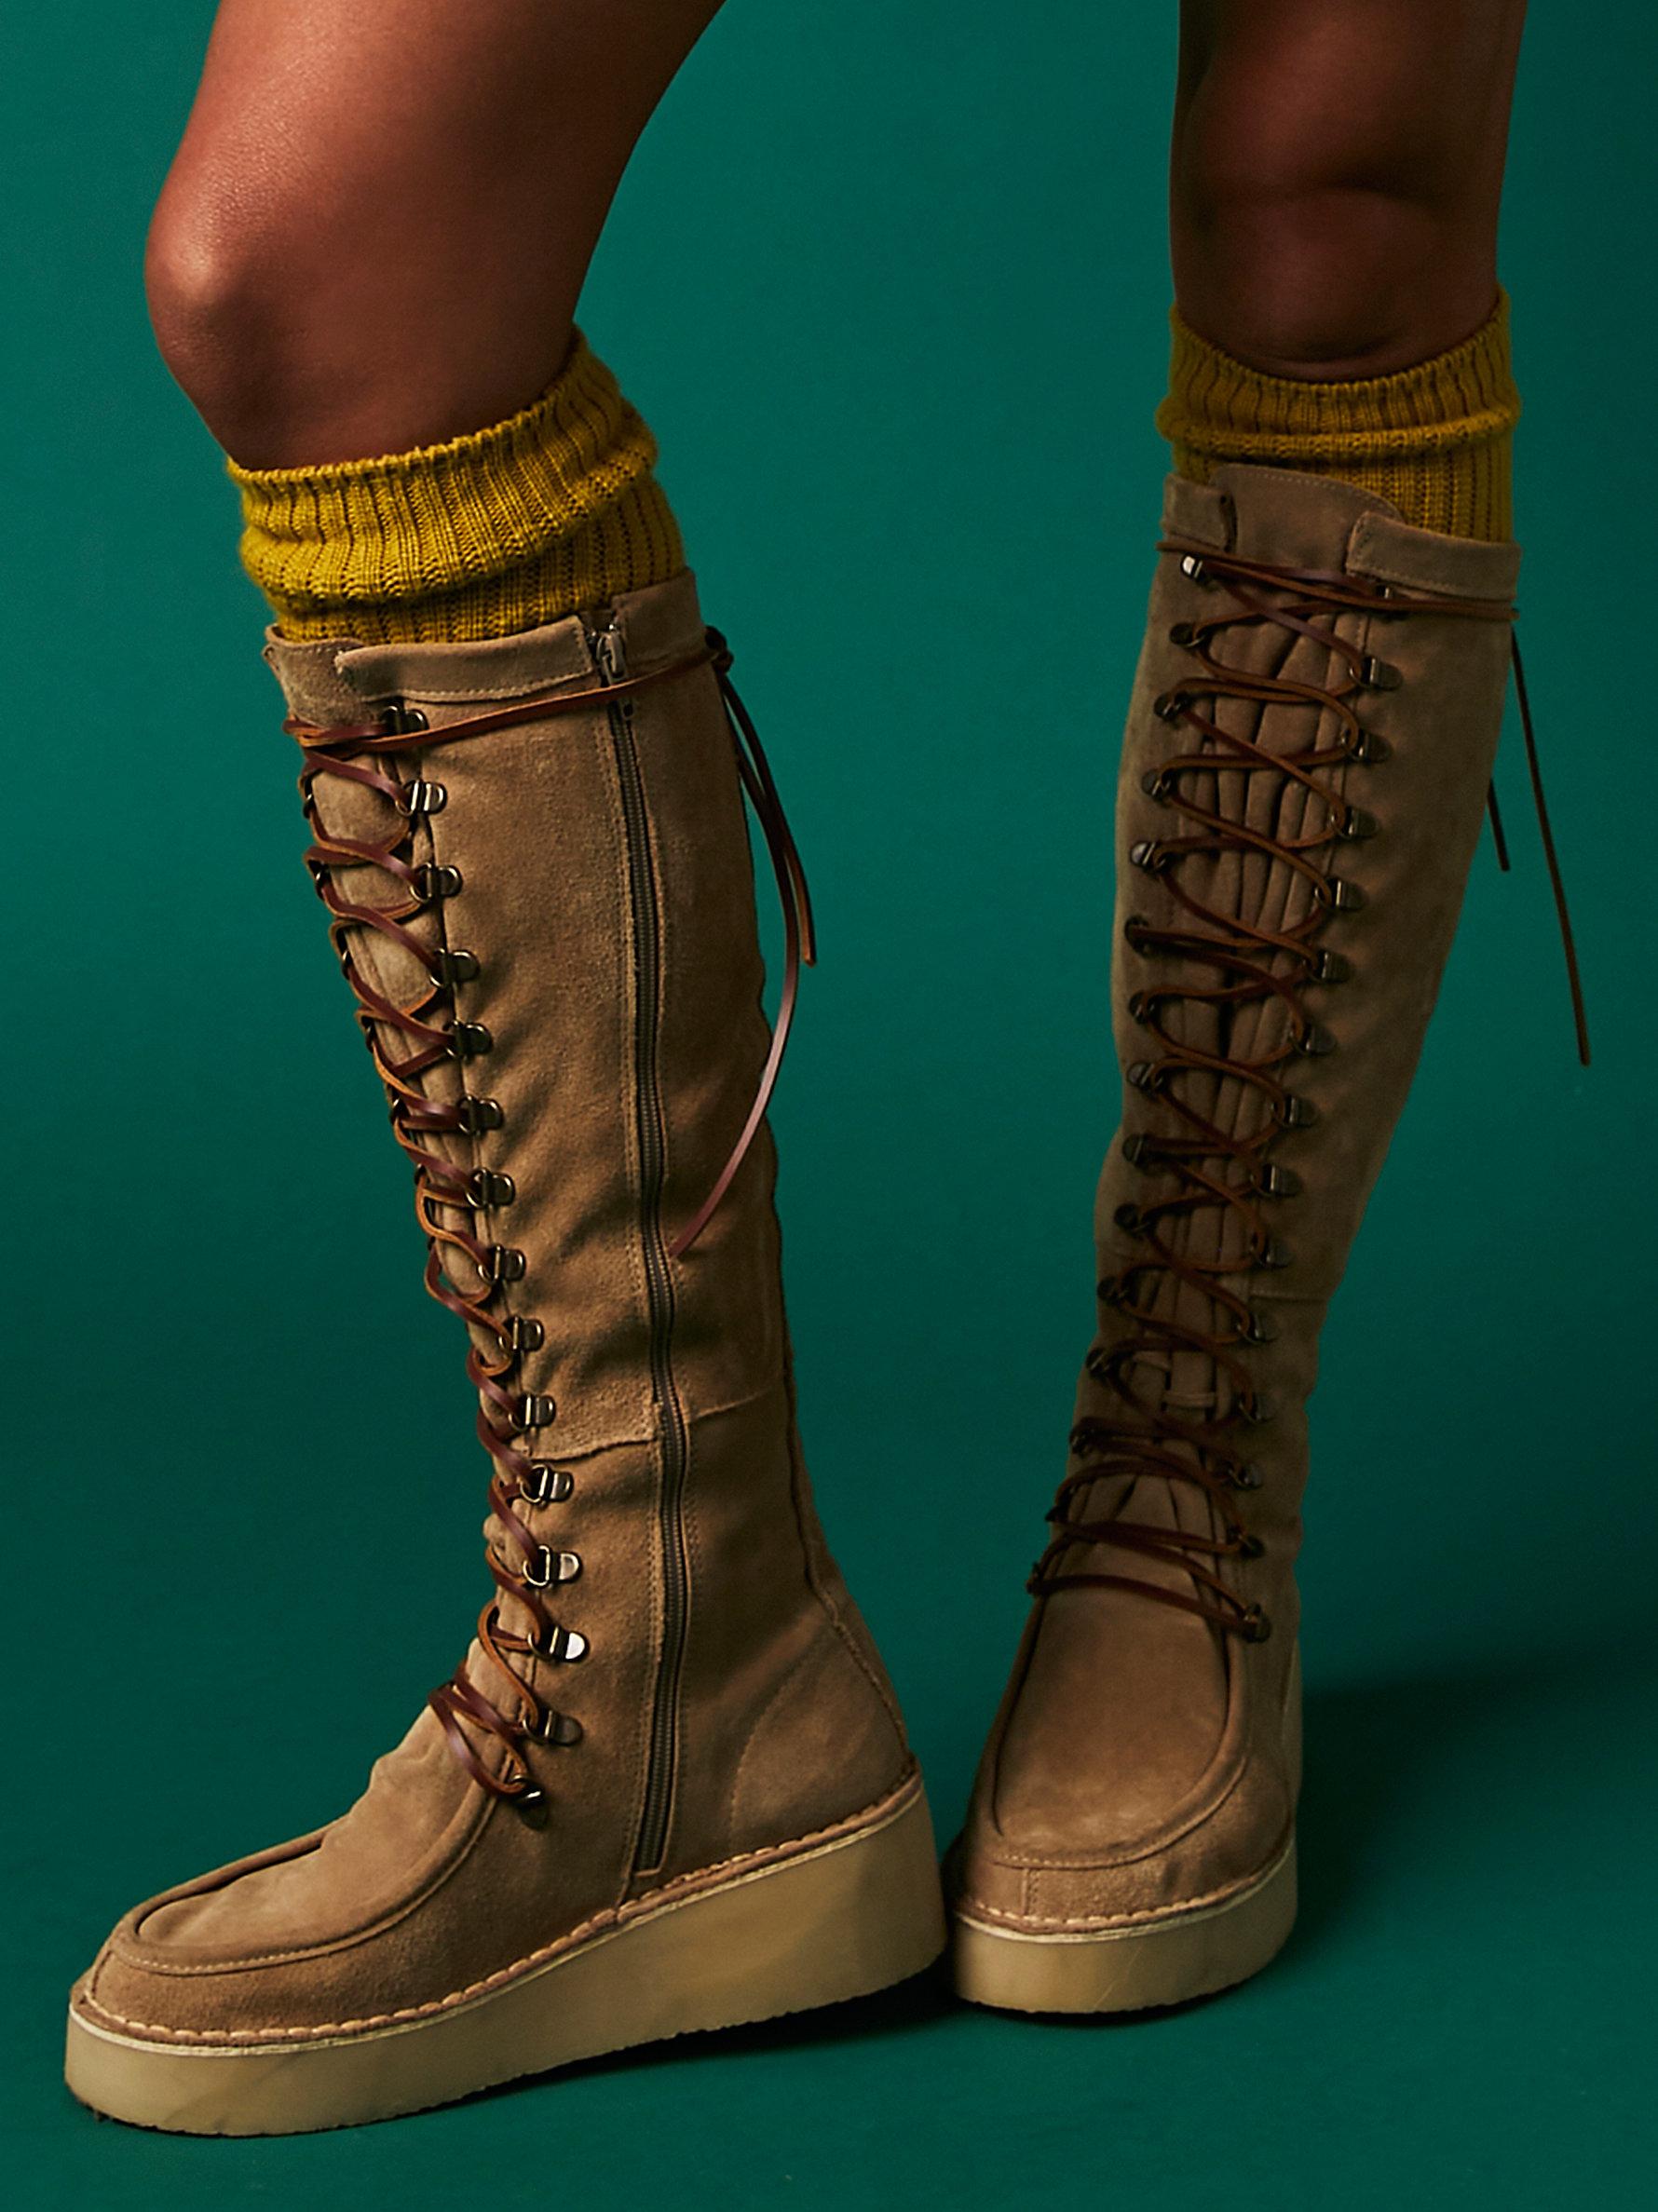 Free People Bottes Hautes À Lacets Ava in Green | Lyst